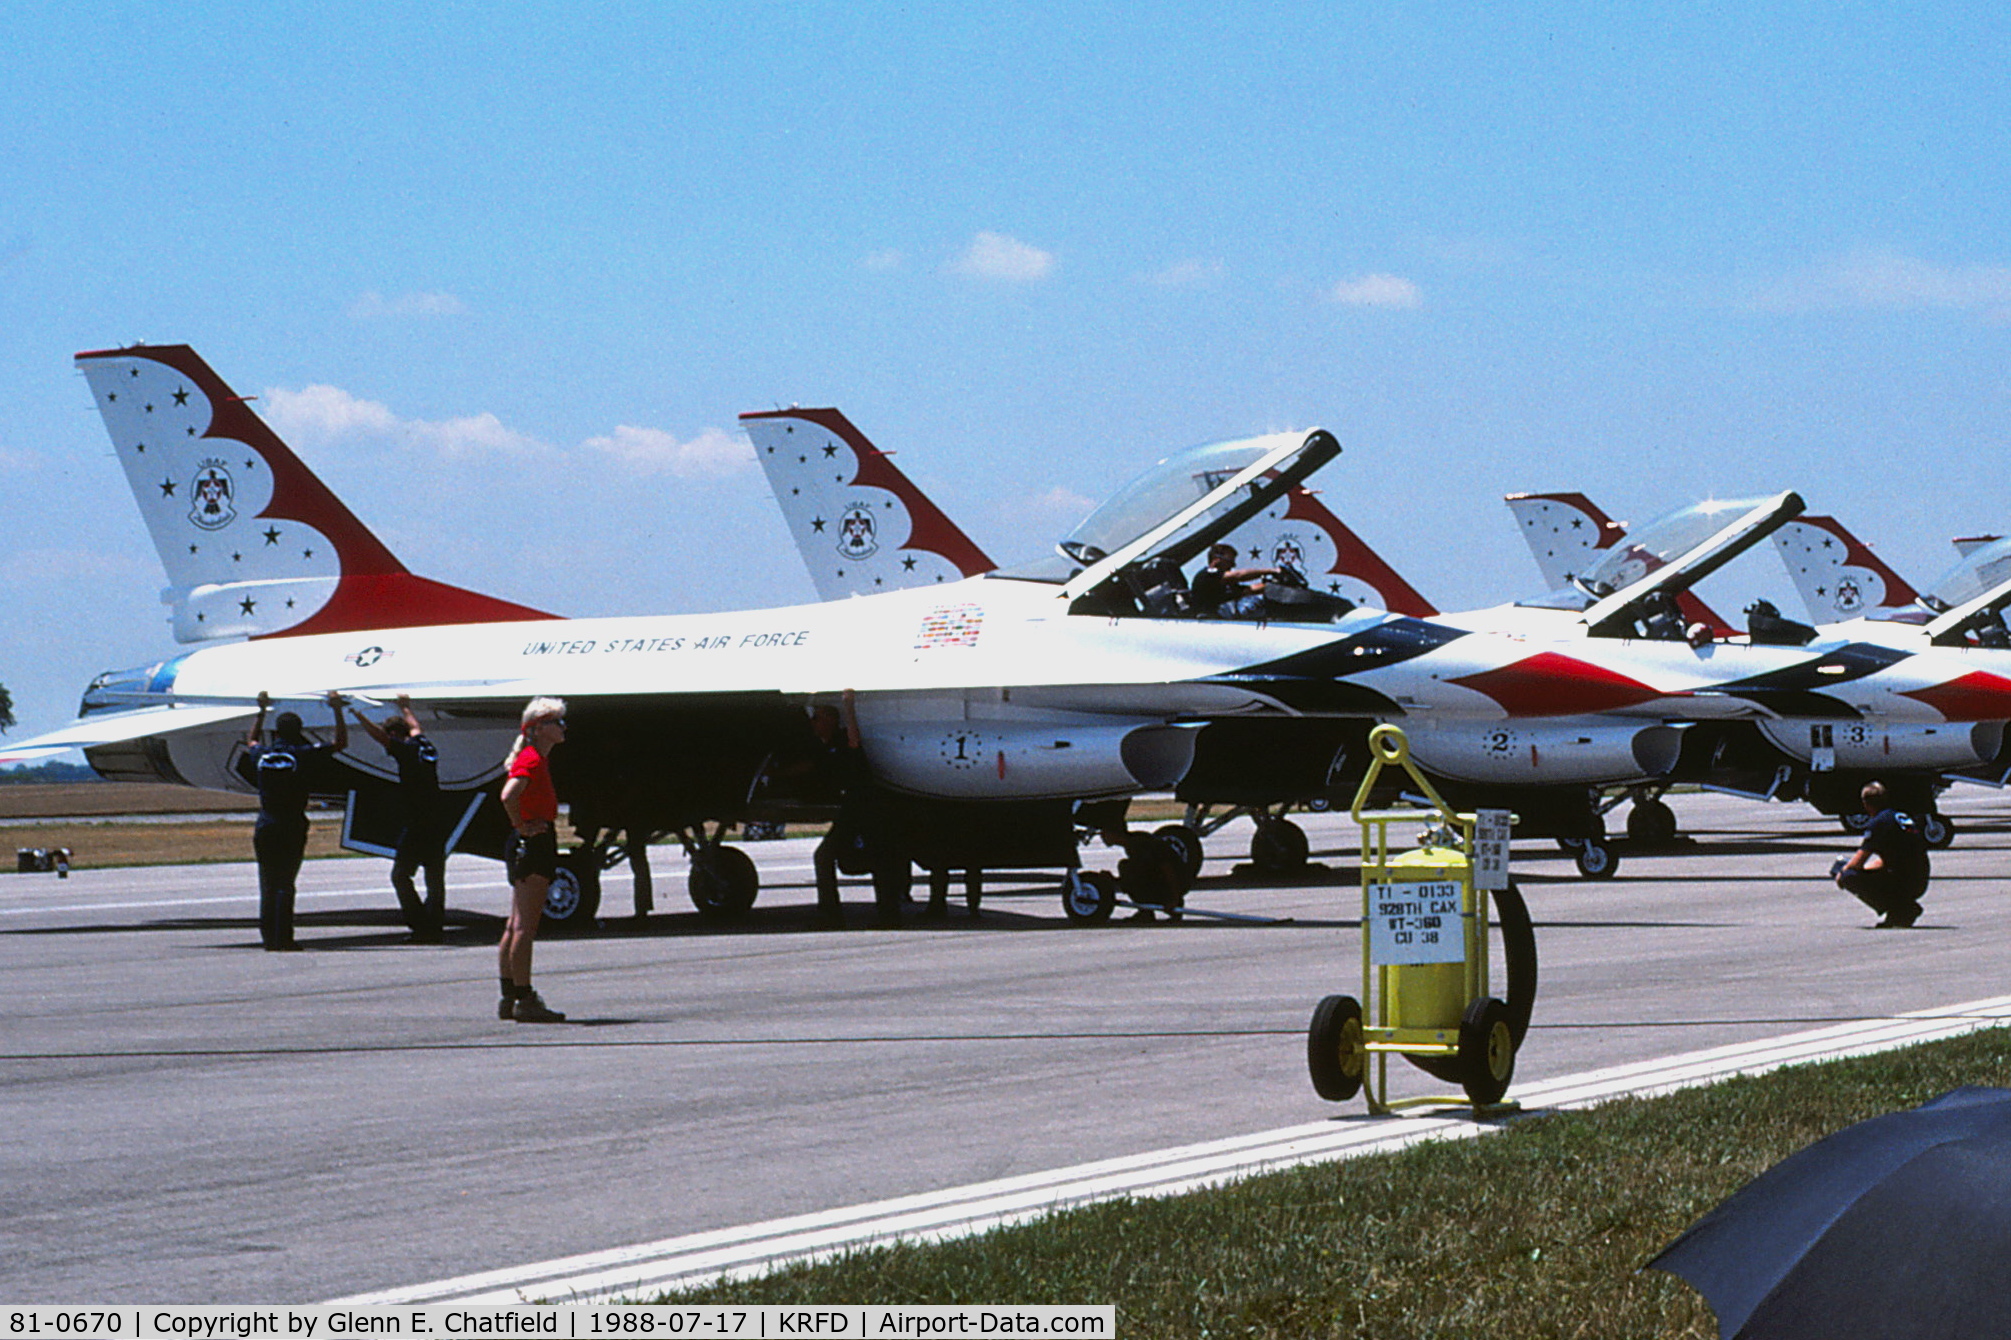 81-0670, 1981 General Dynamics F-16A C/N 61-351, Thunderbird 1 at the head of the line up